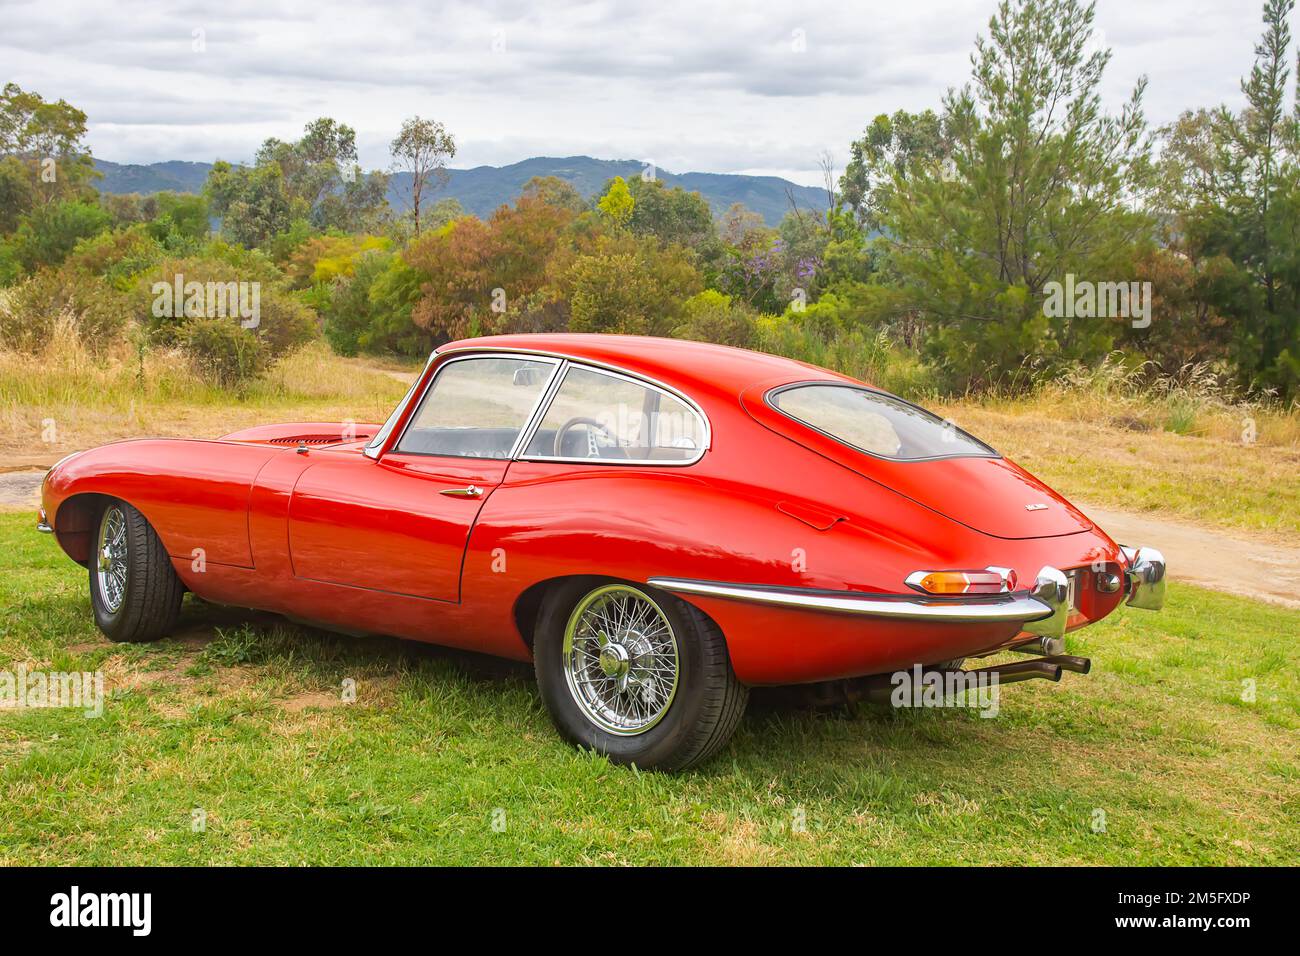 A red 1962 Jaguar E Type Coupe in an Australian rural setting. Stock Photo